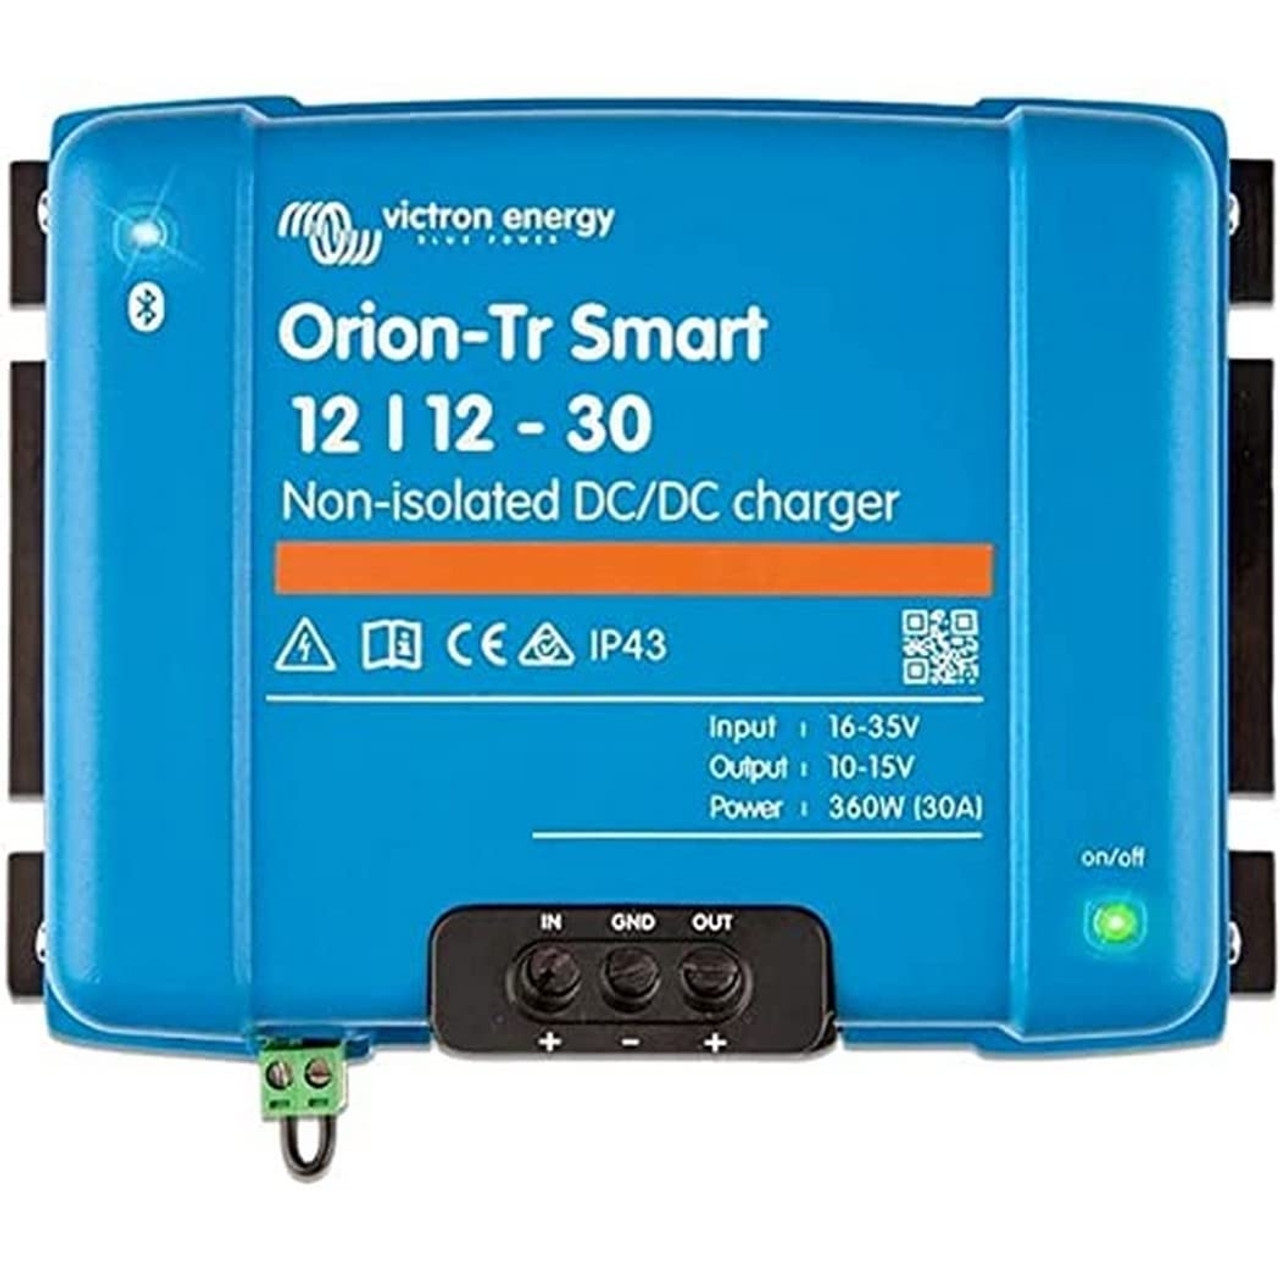 New Product: Orion-Tr Smart DC-DC charger - Victron Energy